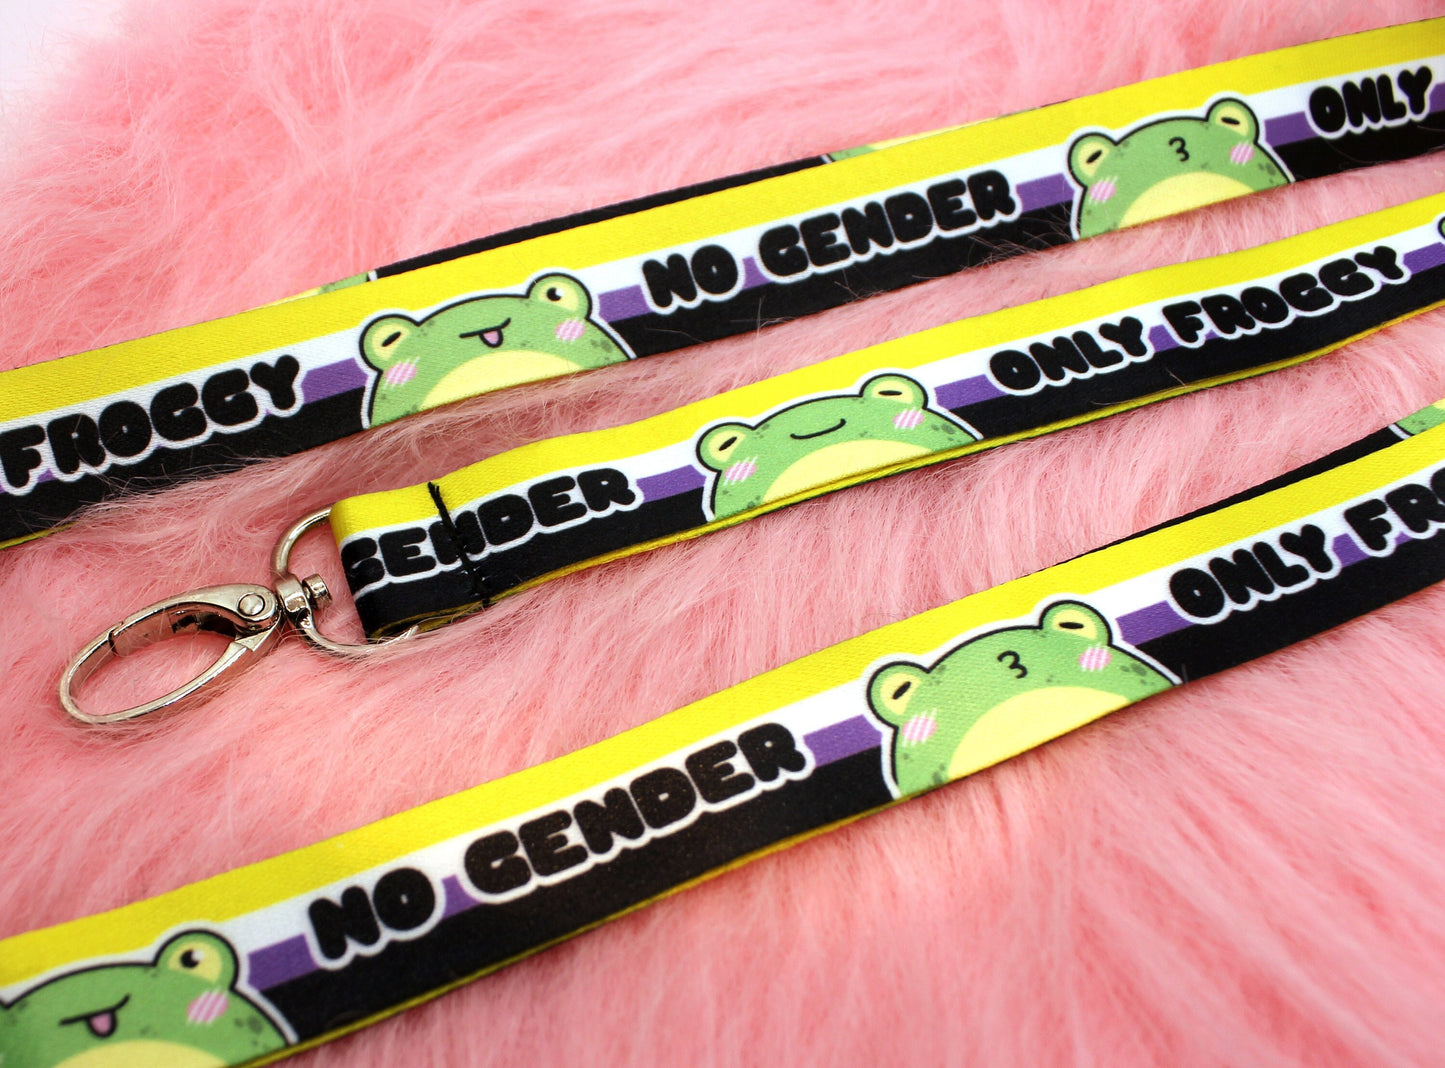 No Gender Only Froggy Lanyards - Non-Binary Pride Flag